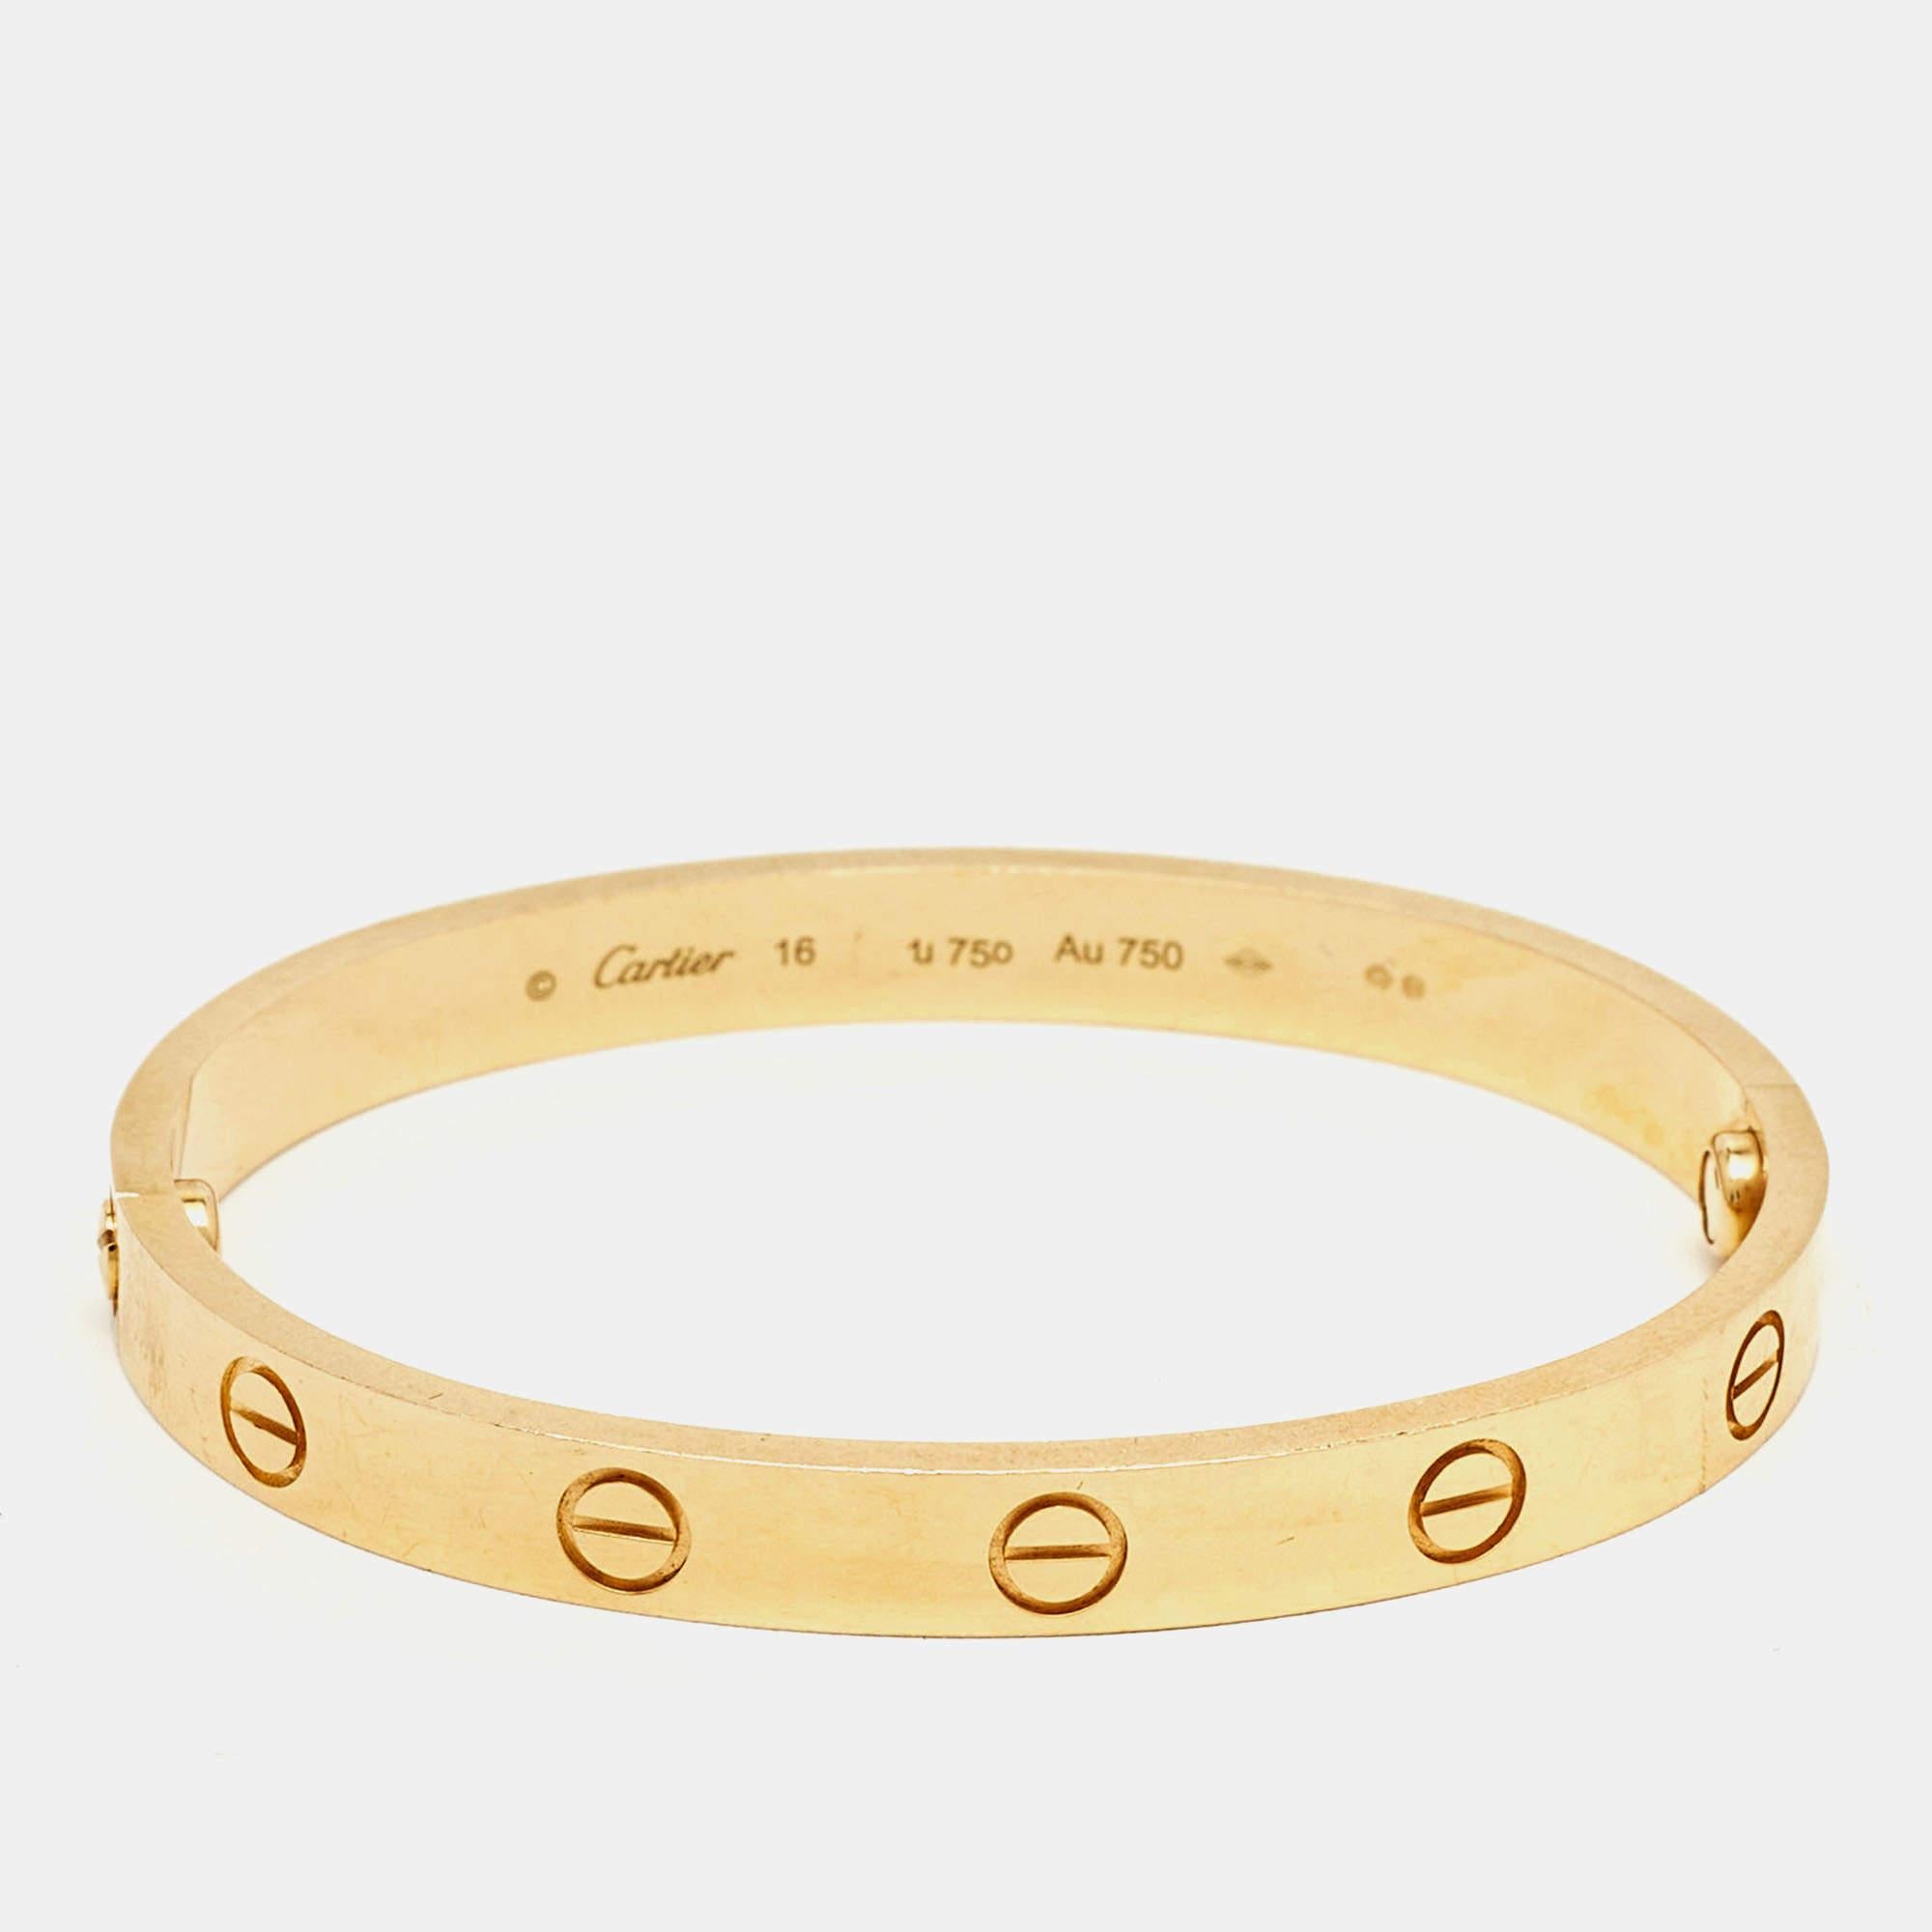 Crafted with exquisite finesse, the Cartier Love bracelet epitomizes timeless elegance. Its sleek design seamlessly blends luxury with simplicity, showcasing Cartier's renowned craftsmanship. The iconic screw motifs symbolize eternal love and